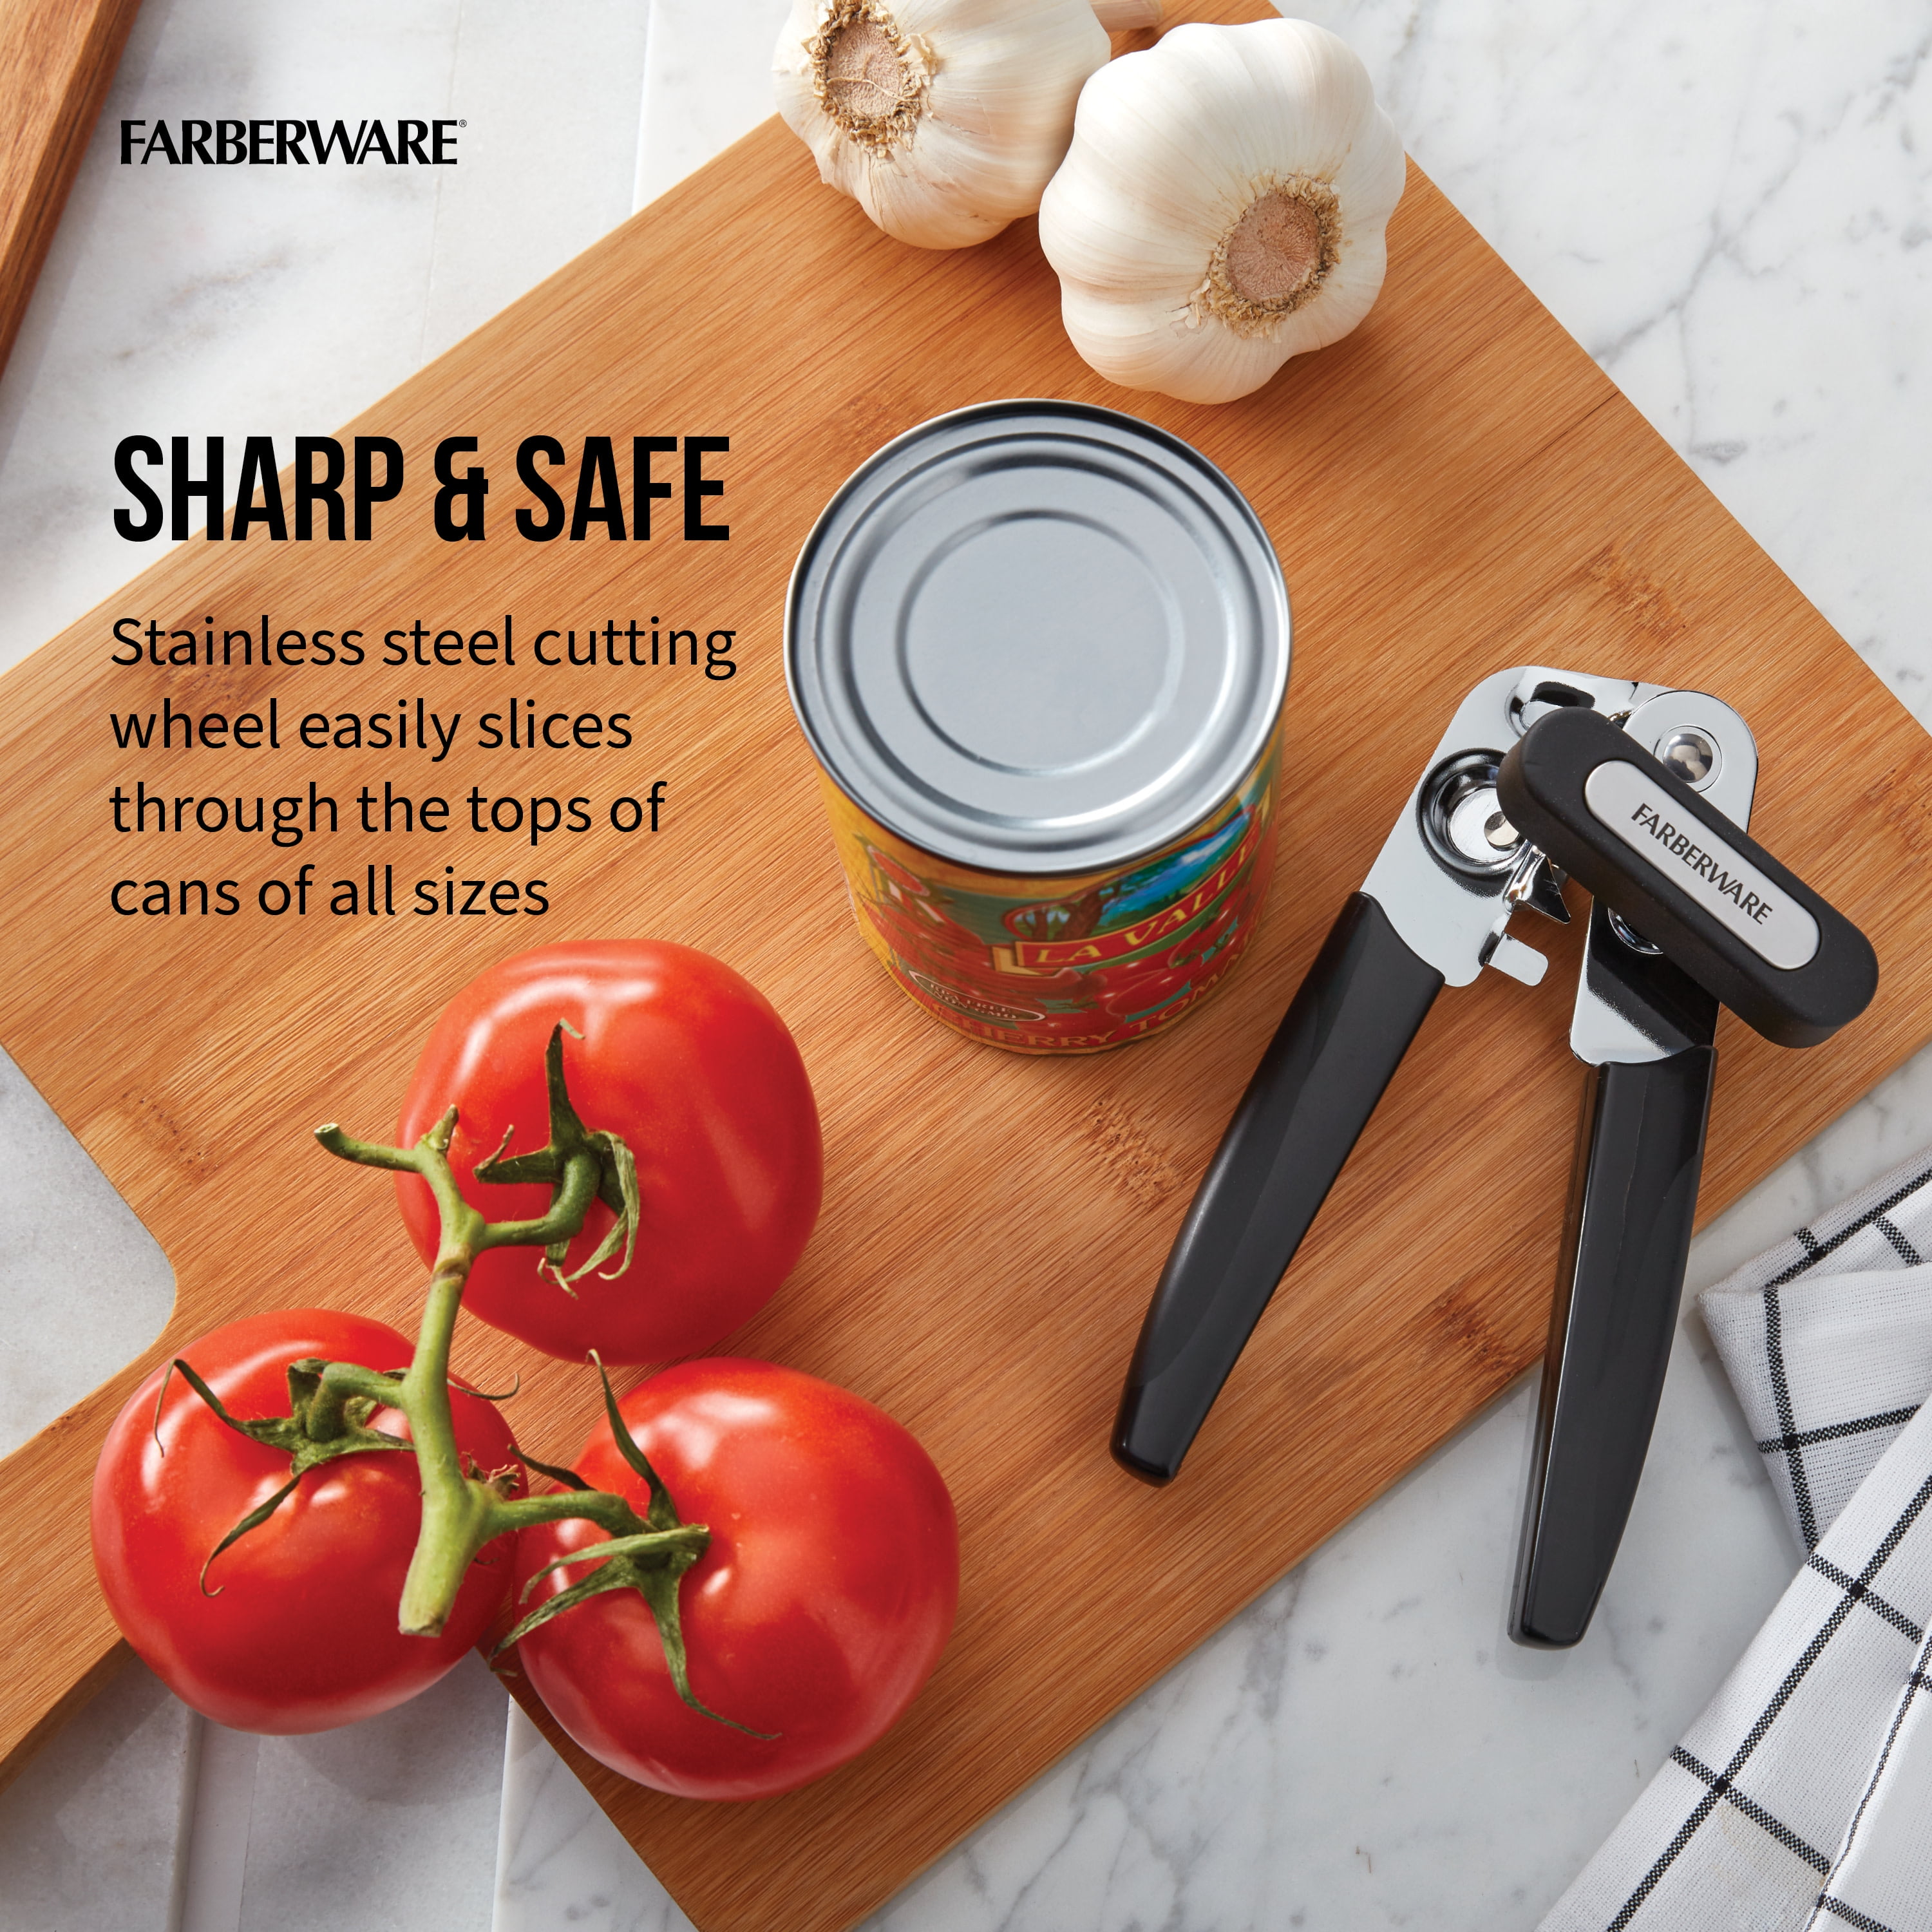 Farberware Safety Can Opener How To Use 